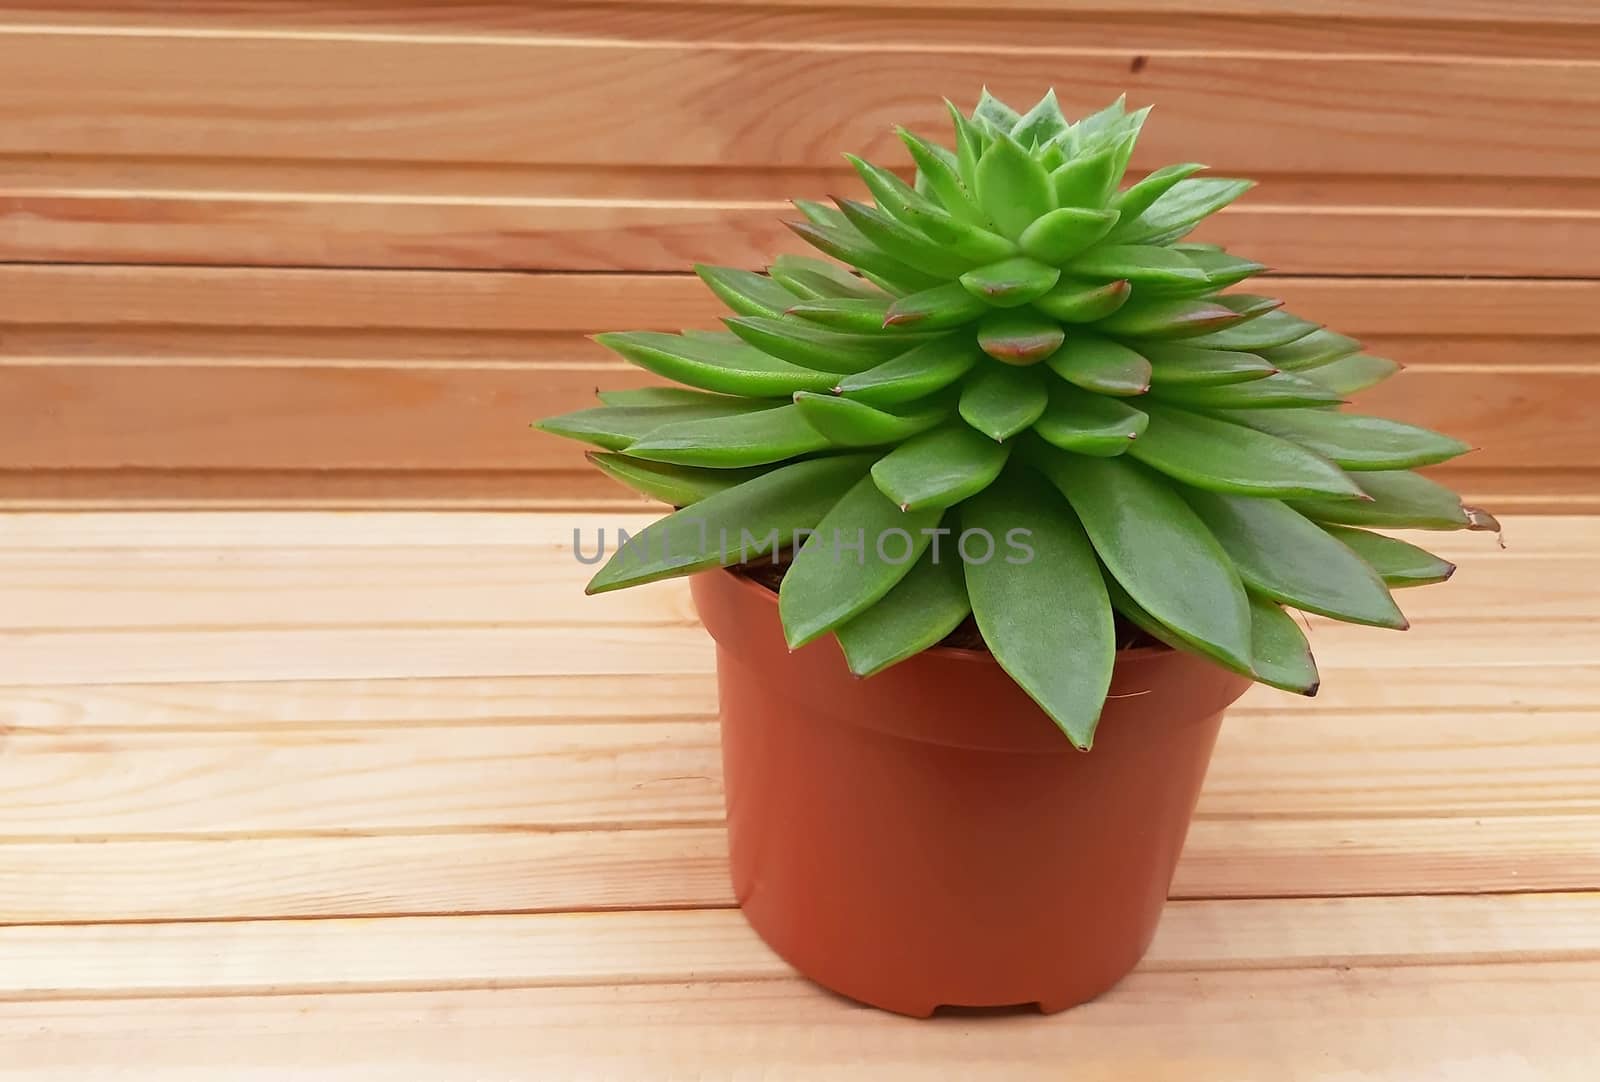 Echeveria on wooden background with copy space by Mindru